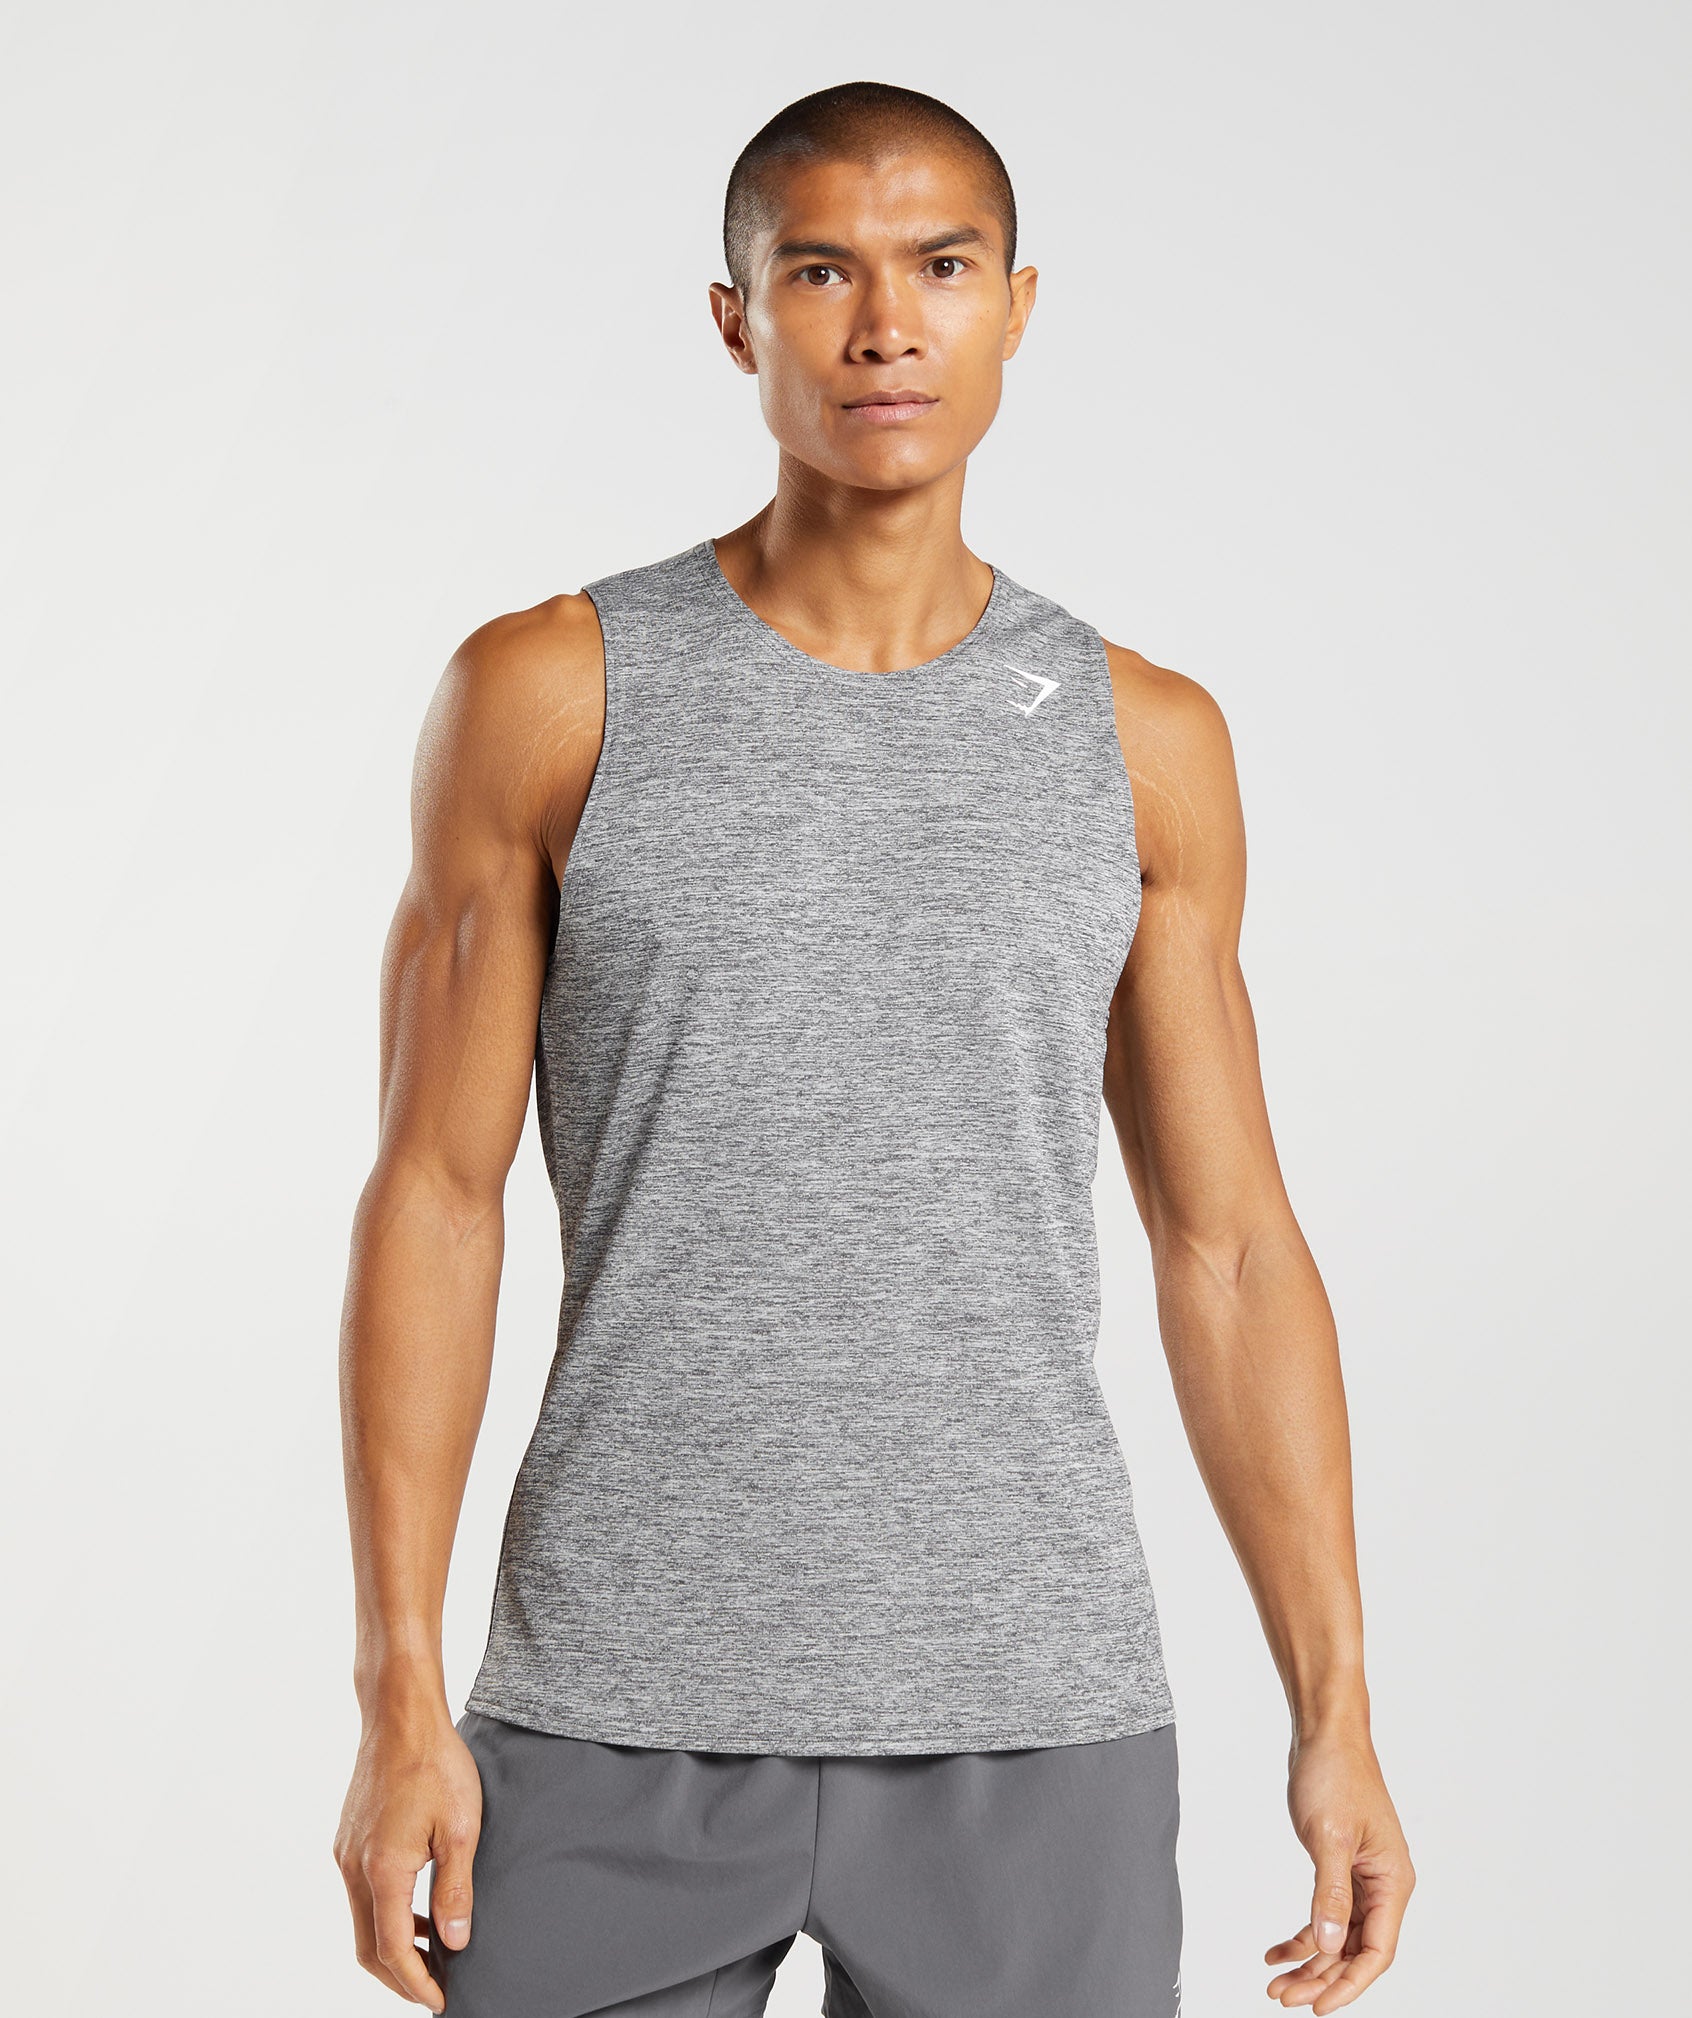 Arrival Marl Tank in Silhouette Grey/Light Grey Marl is out of stock